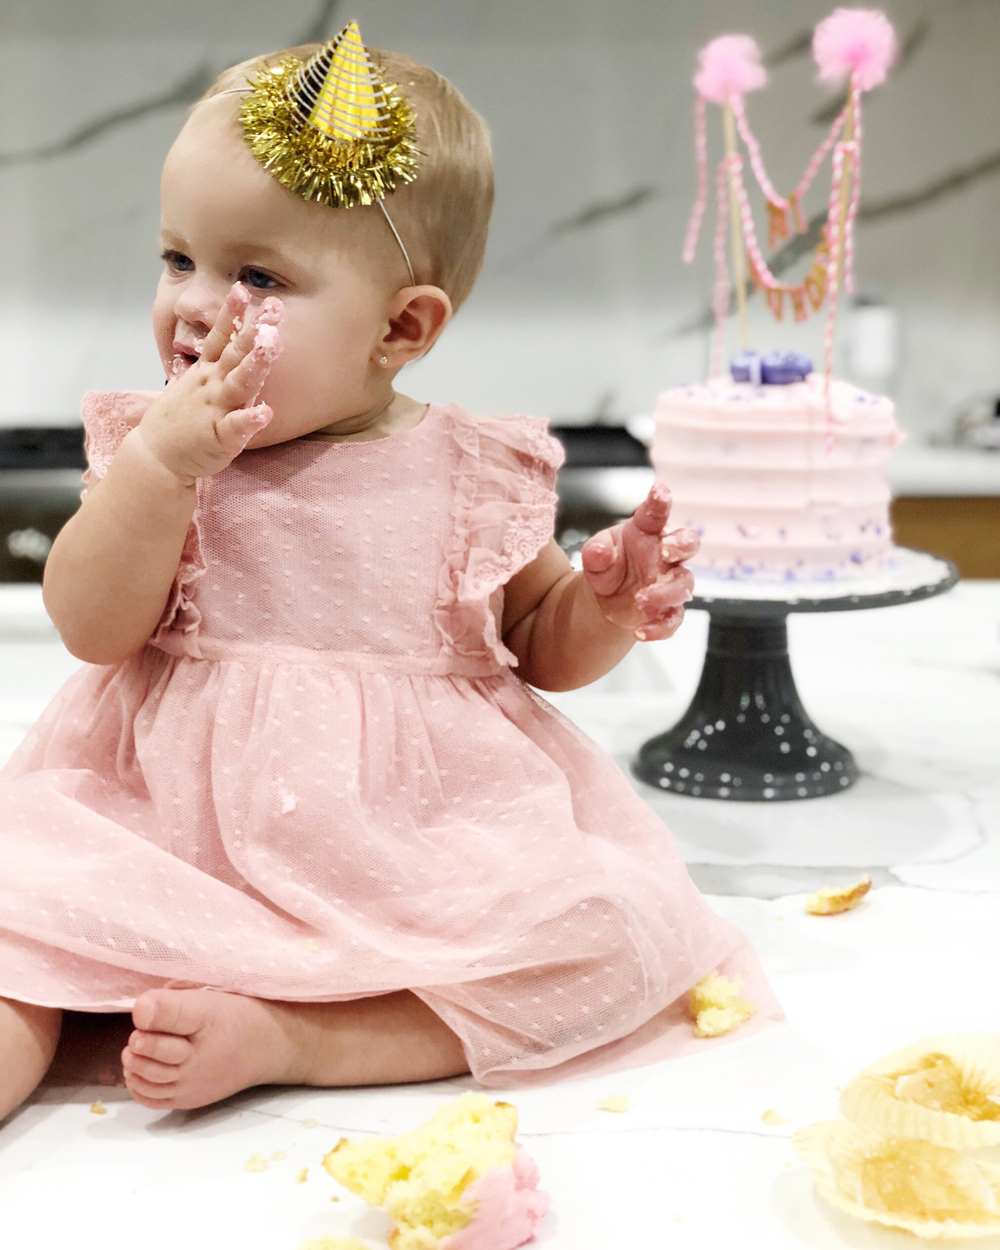 kailee-wright-harper's-first-birthday